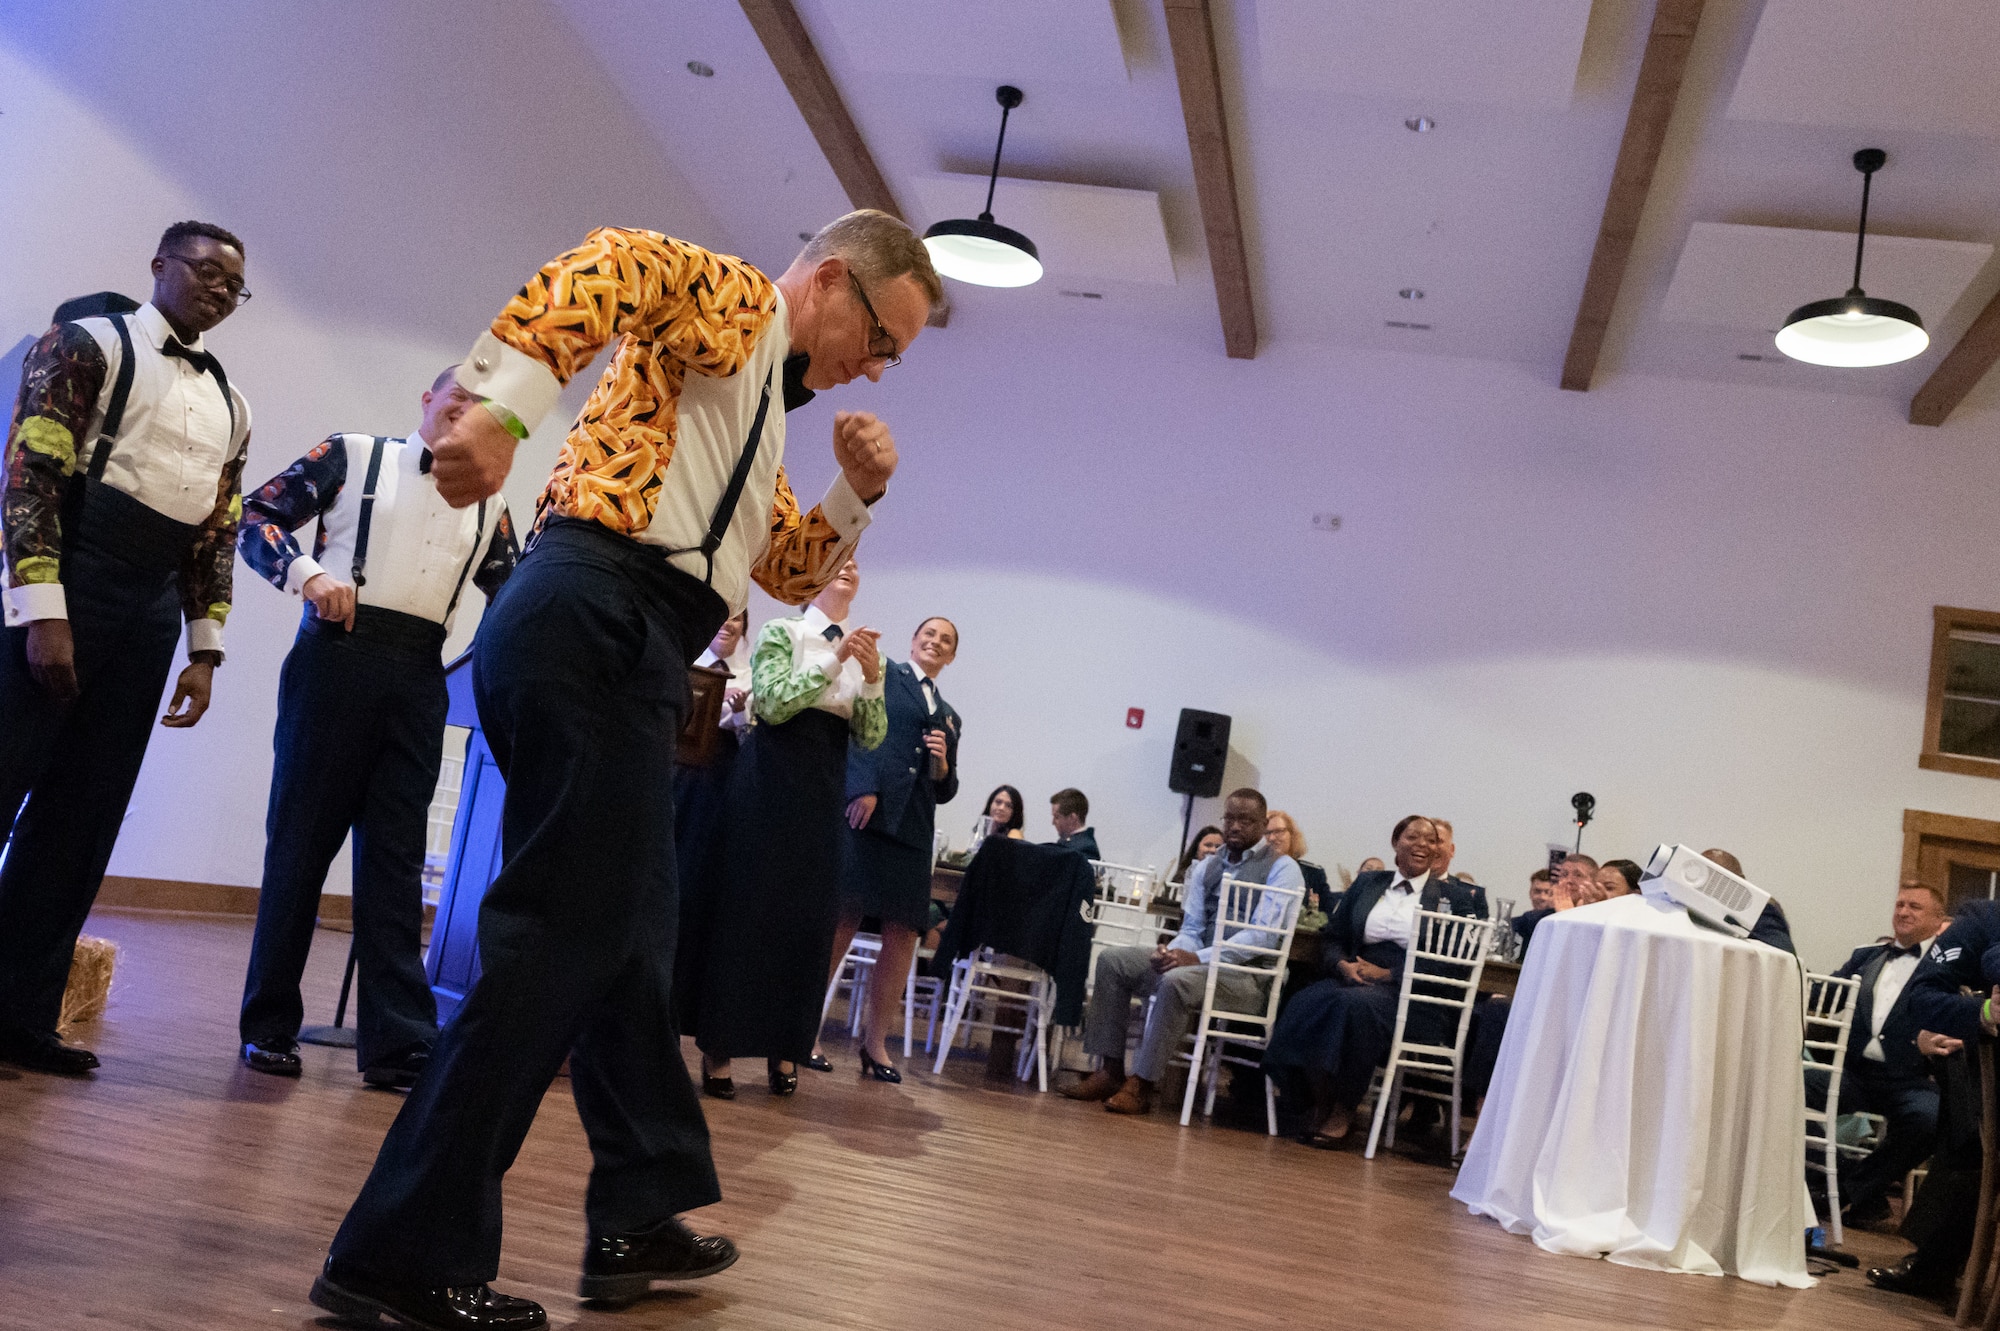 Col. Kenneth Weiner, 436th Operations Group commander, dances during the 76th Air Force Ball in Dover, Delaware, Sept. 8, 2023. The Dover AFB Air Force Ball celebrated the 76th anniversary of the U.S. Air Force. (U.S. Air Force photo by Airman 1st Class Dieondiere Jefferies)